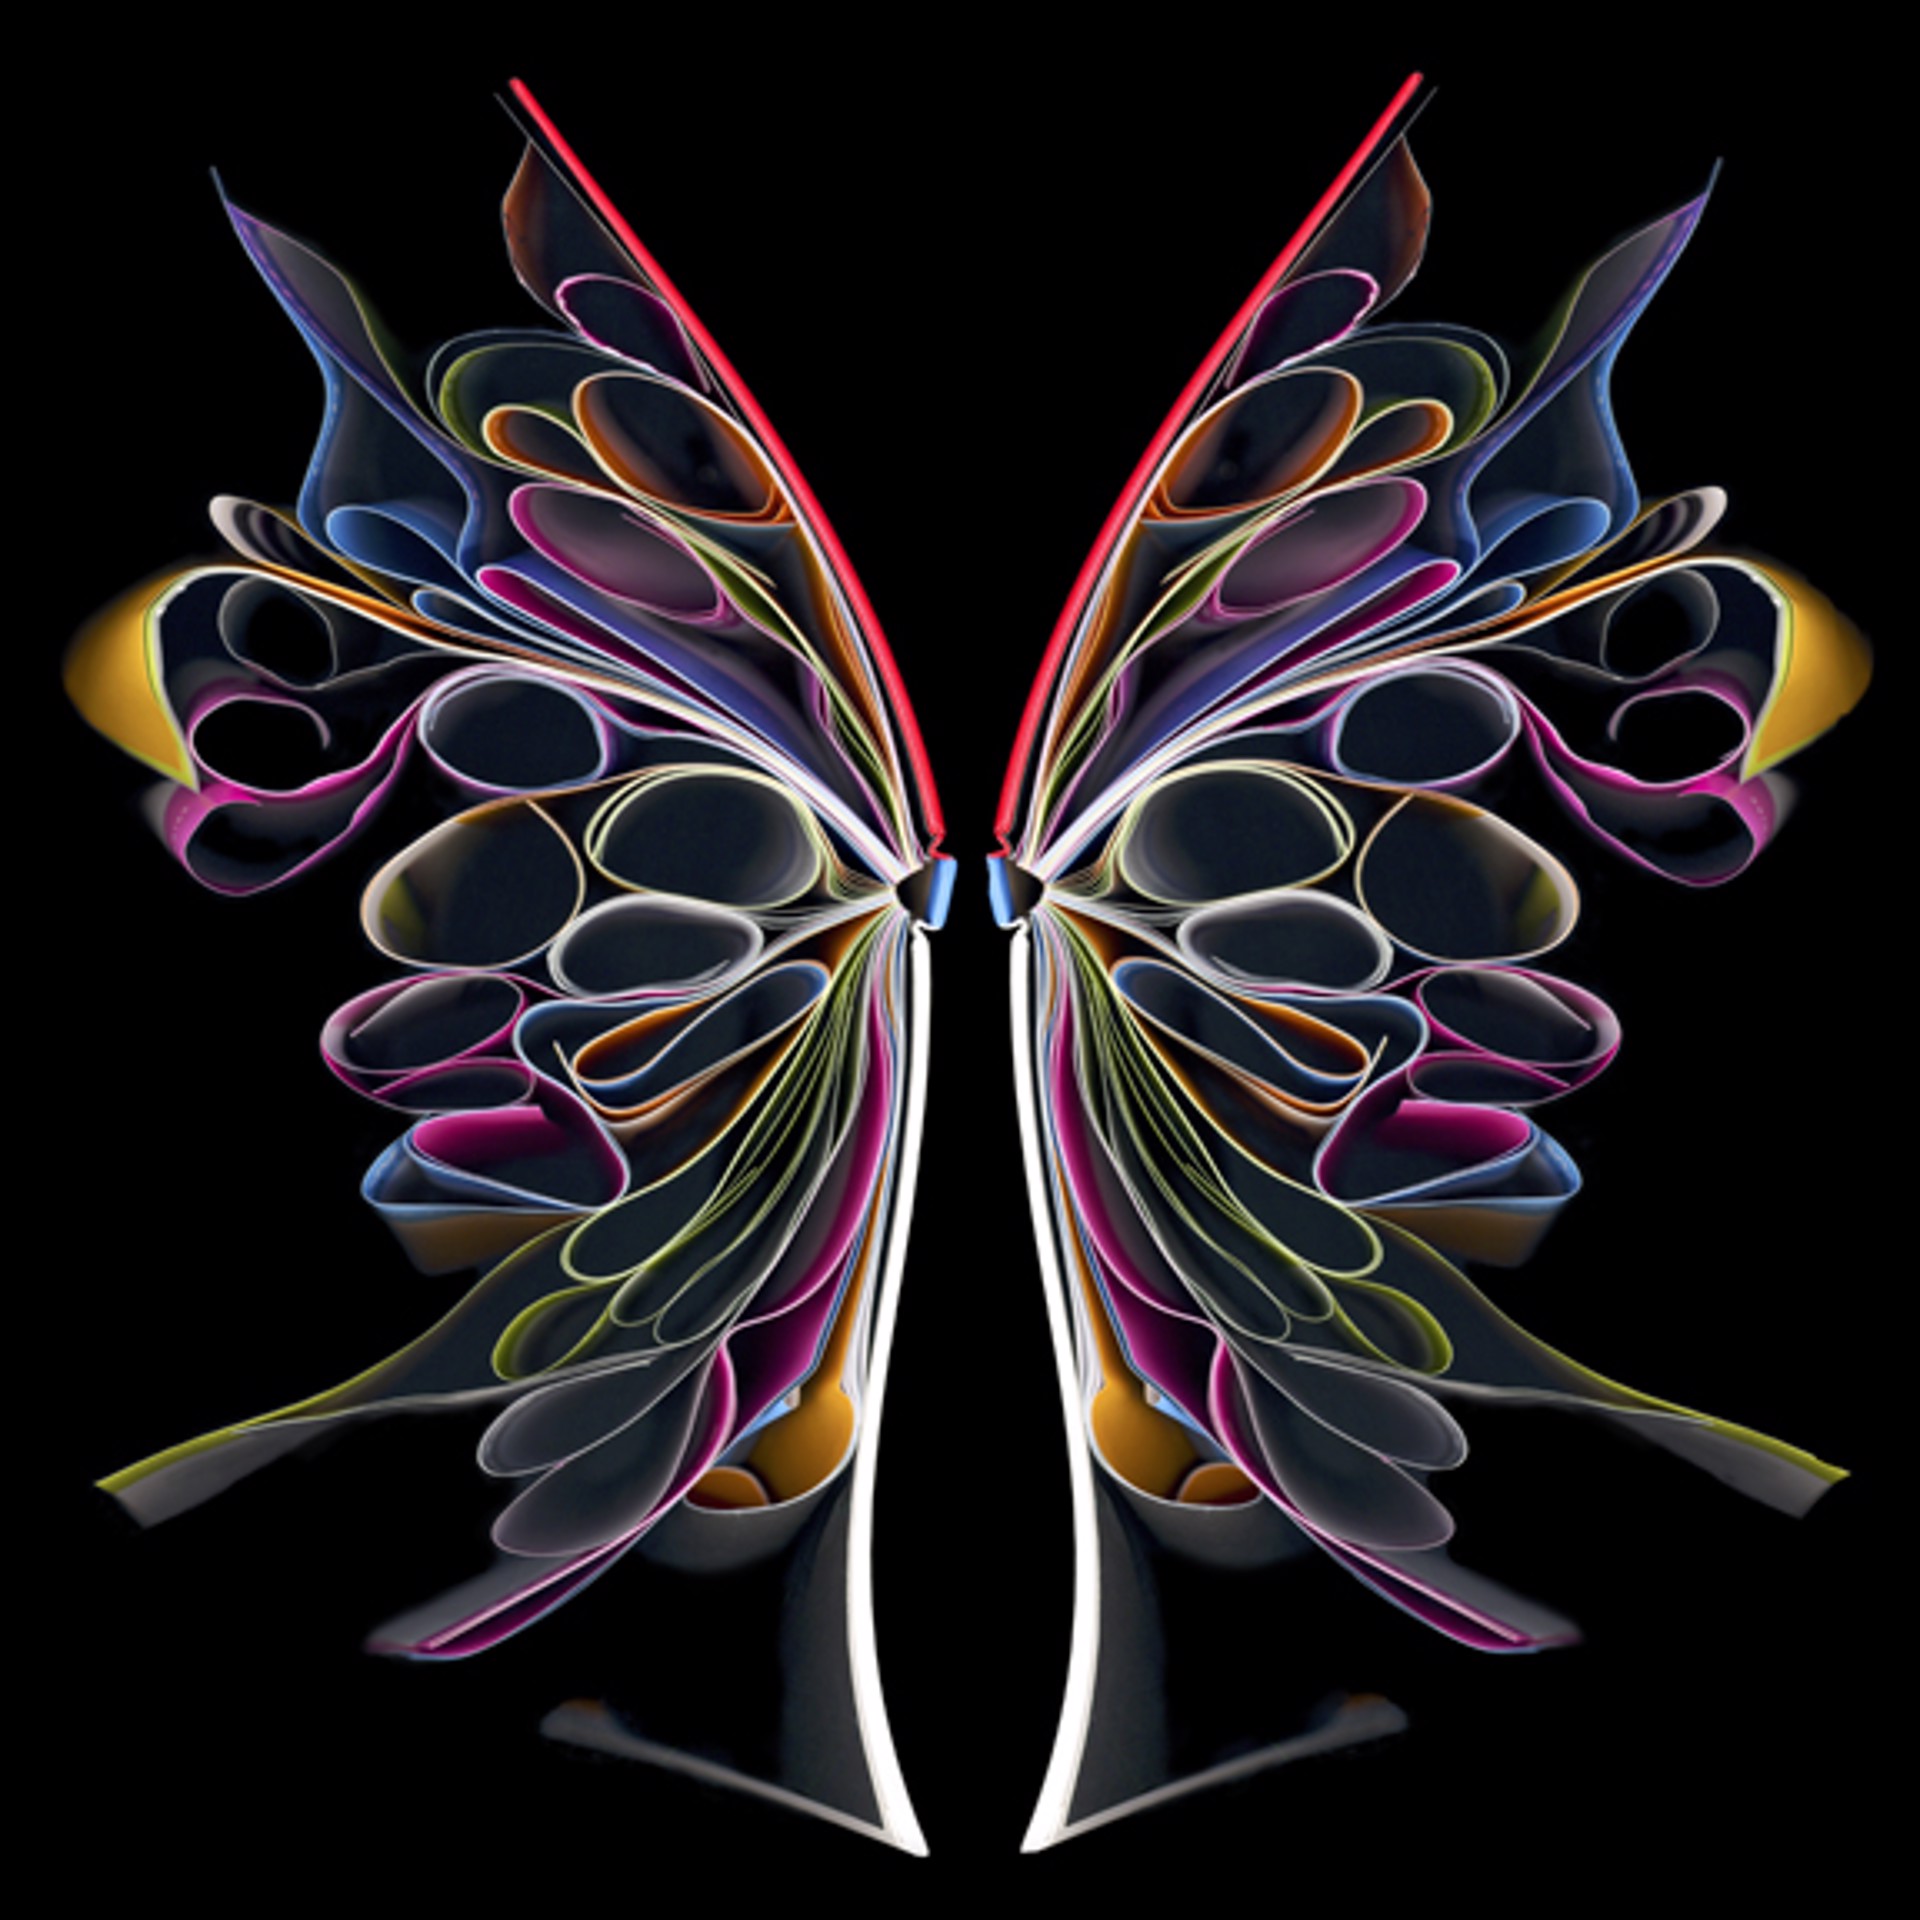 Butterfly 2 by Cara Barer